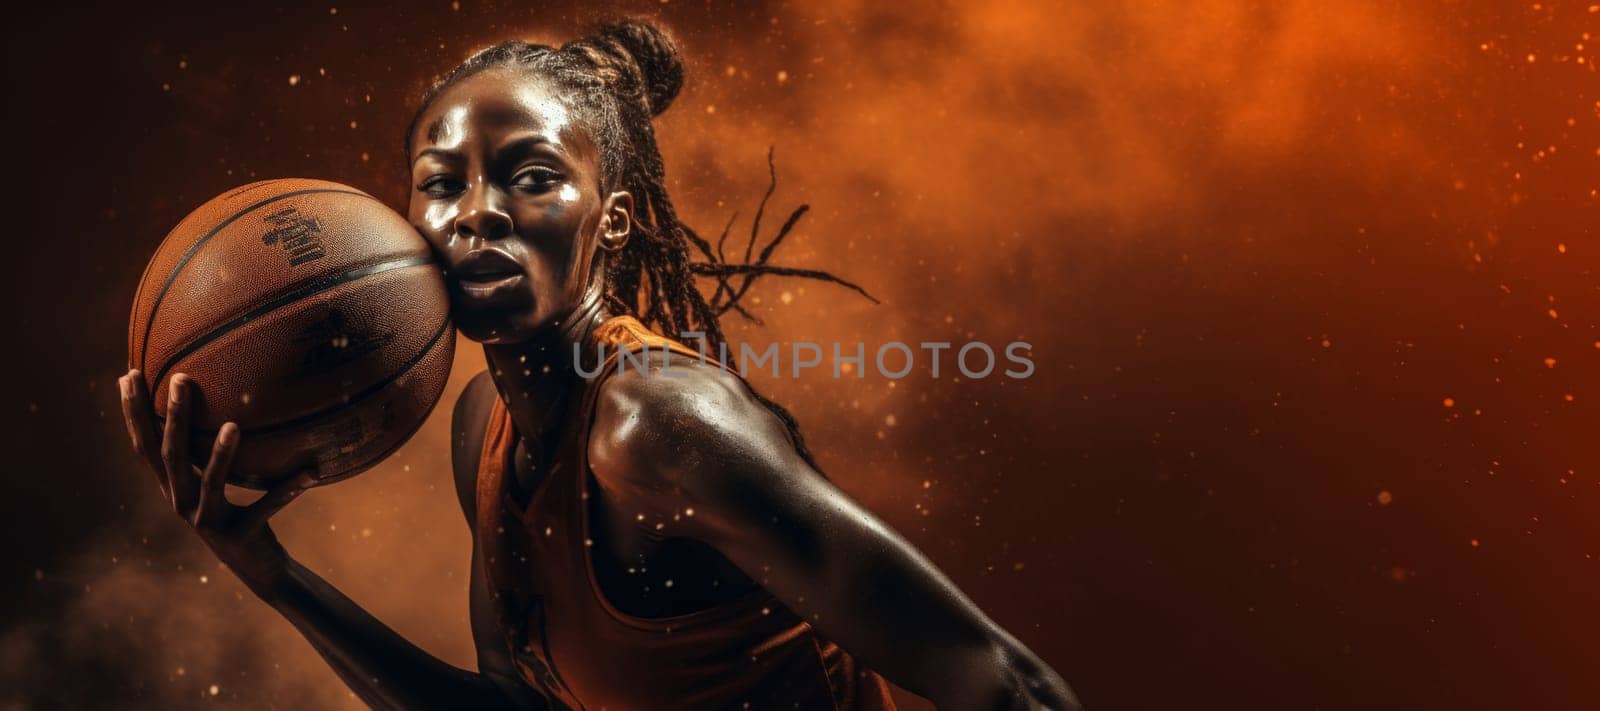 Dynamic Basketball Player in Action Shot by andreyz